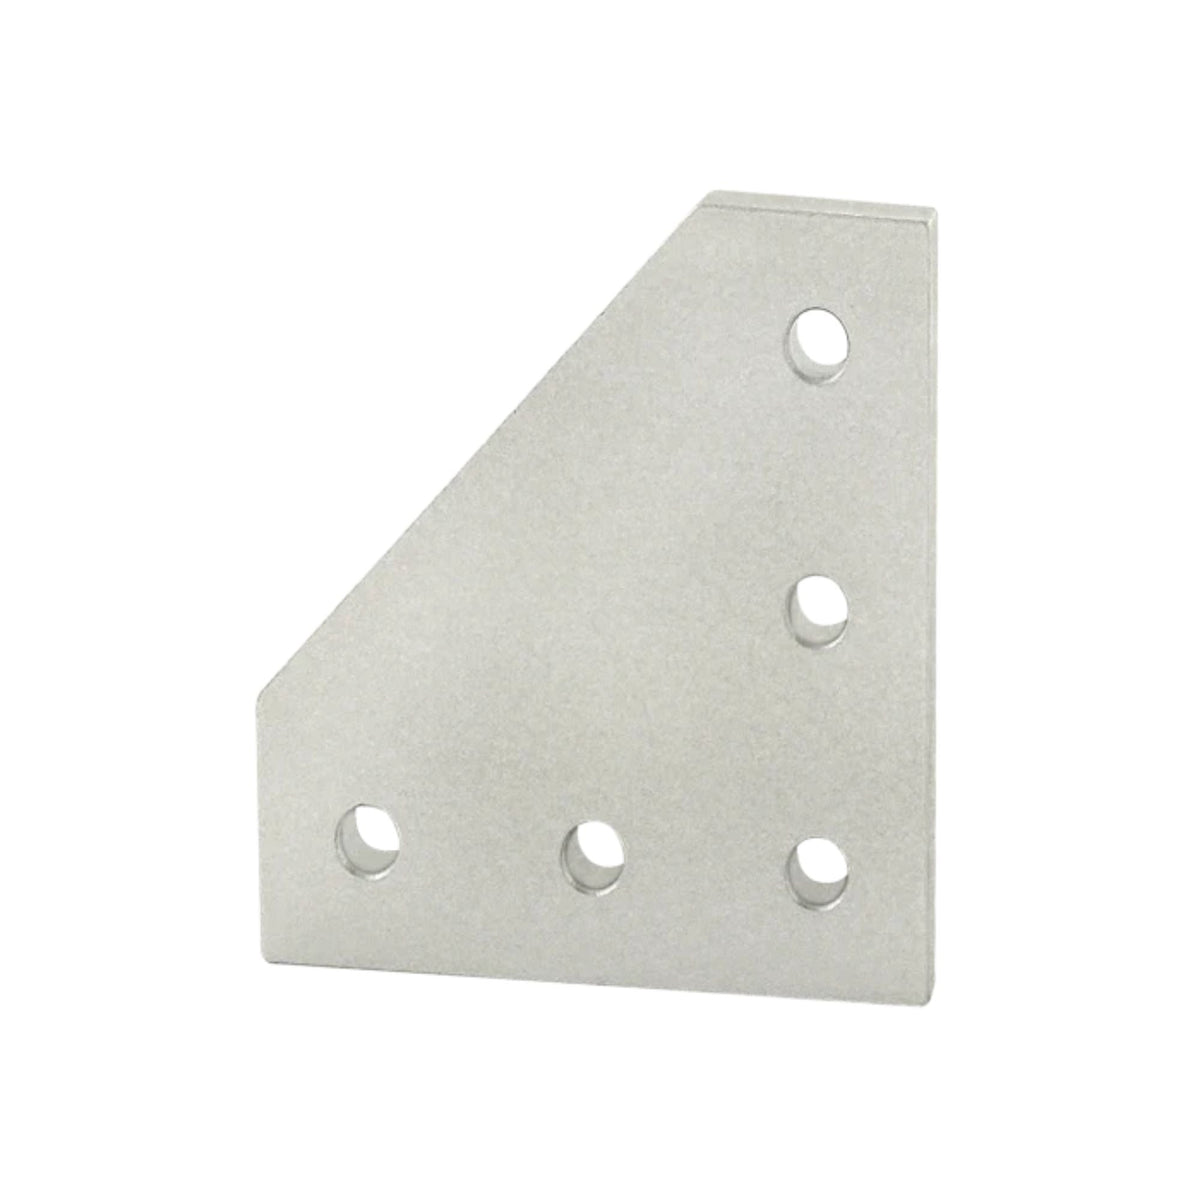 side view of a flat, rectangular mounting plate with five holes and an angled top left corner